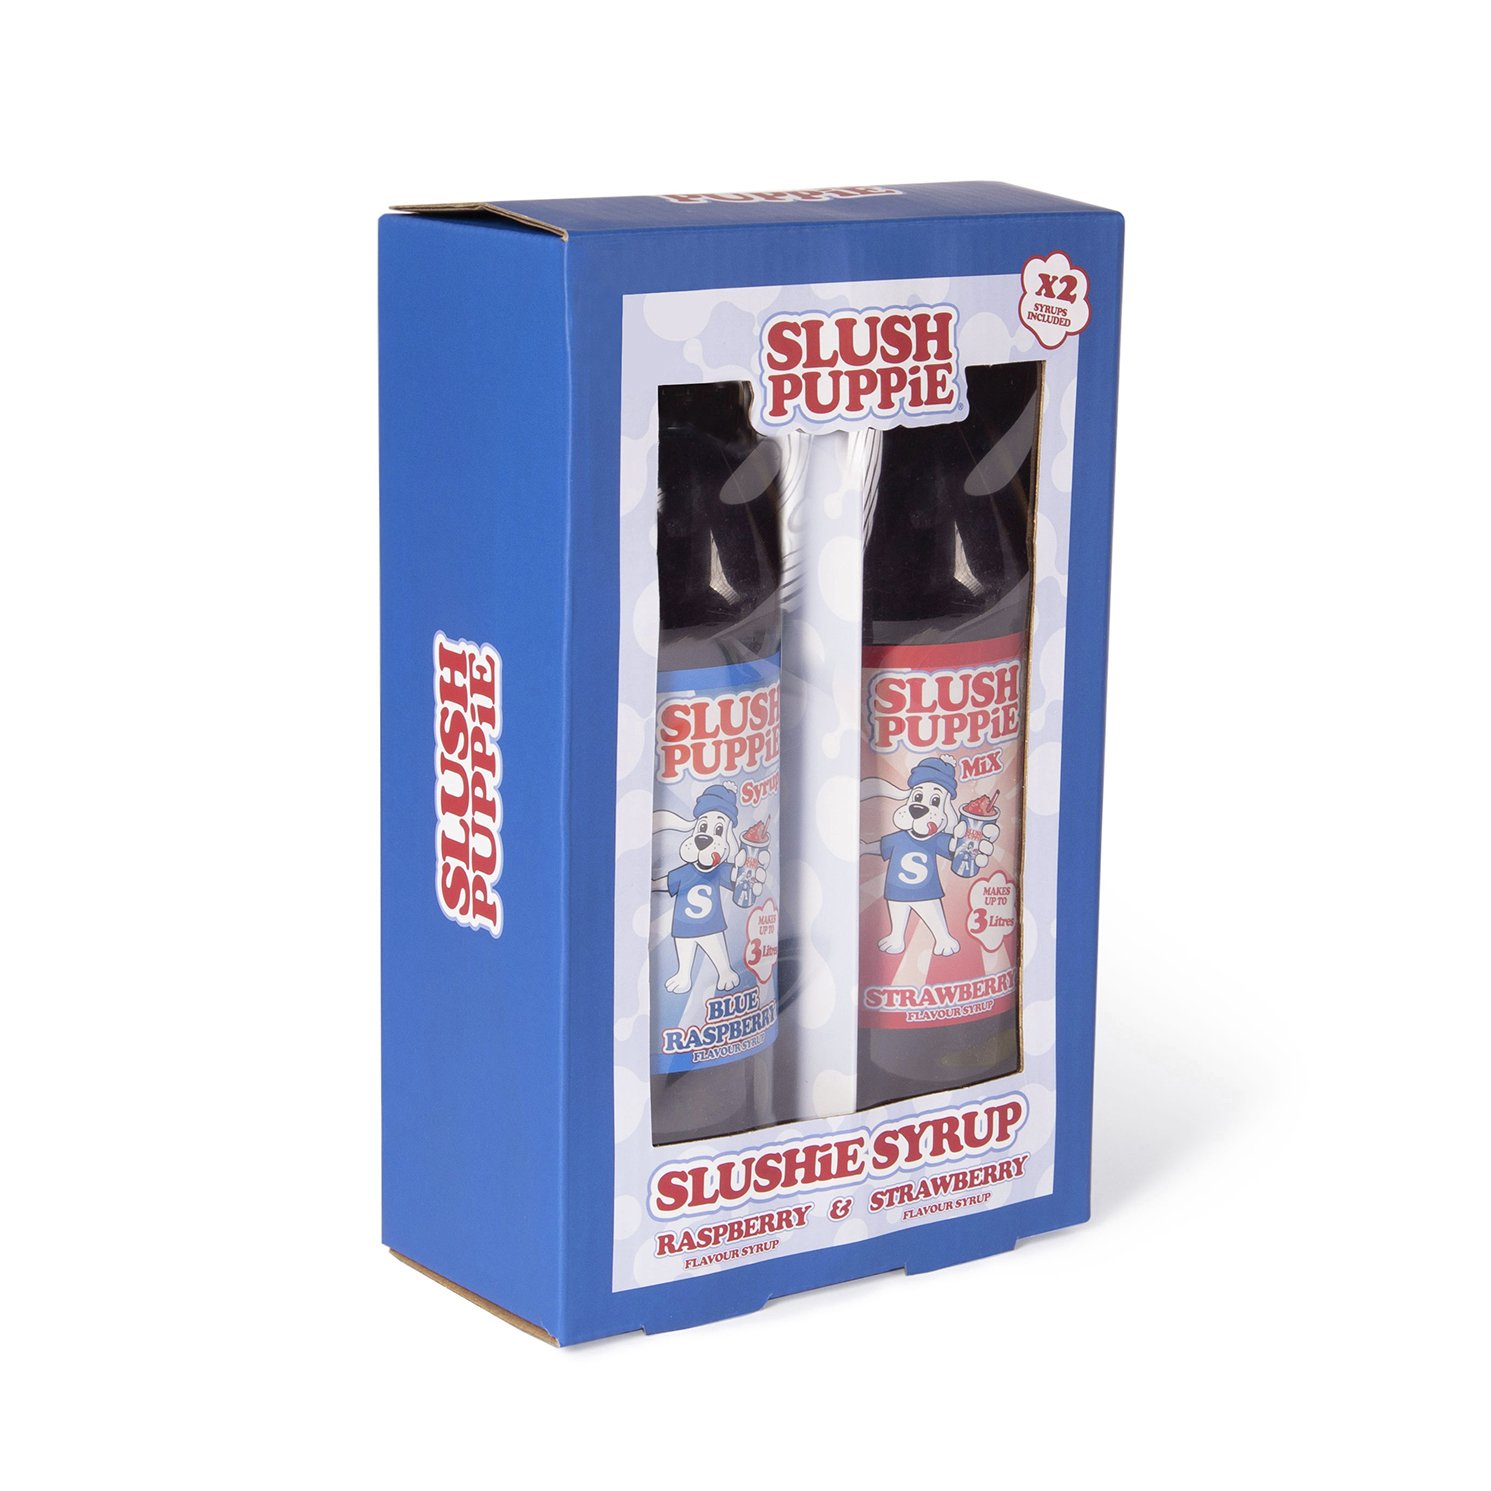 Slush Puppie Syrup Pack of 2 -  Strawberry and Raspberry 